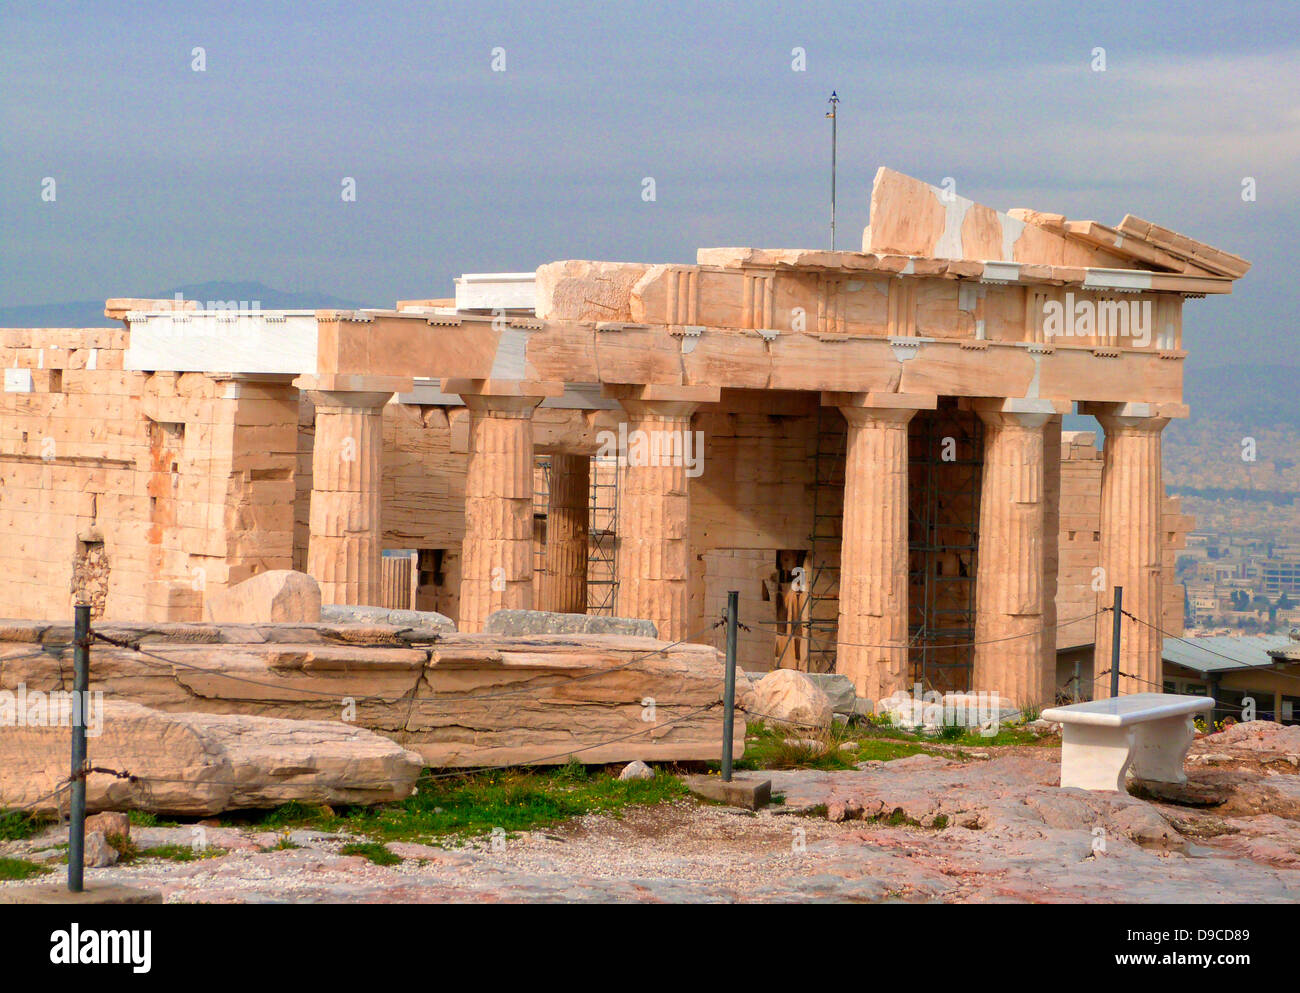 The monumental gateway to the Acropolis, the Propylaea was built under the general direction of the Athenian leader Pericles, but Phidias was given the responsibility for planning the rebuilding the Acropolis as a whole at the conclusion of the Persian Wars. According to Plutarch, the Propylaea was designed by the architect Mnesicles. Construction began in 437 BCE and was terminated in 432, when the building was still unfinished. Stock Photo